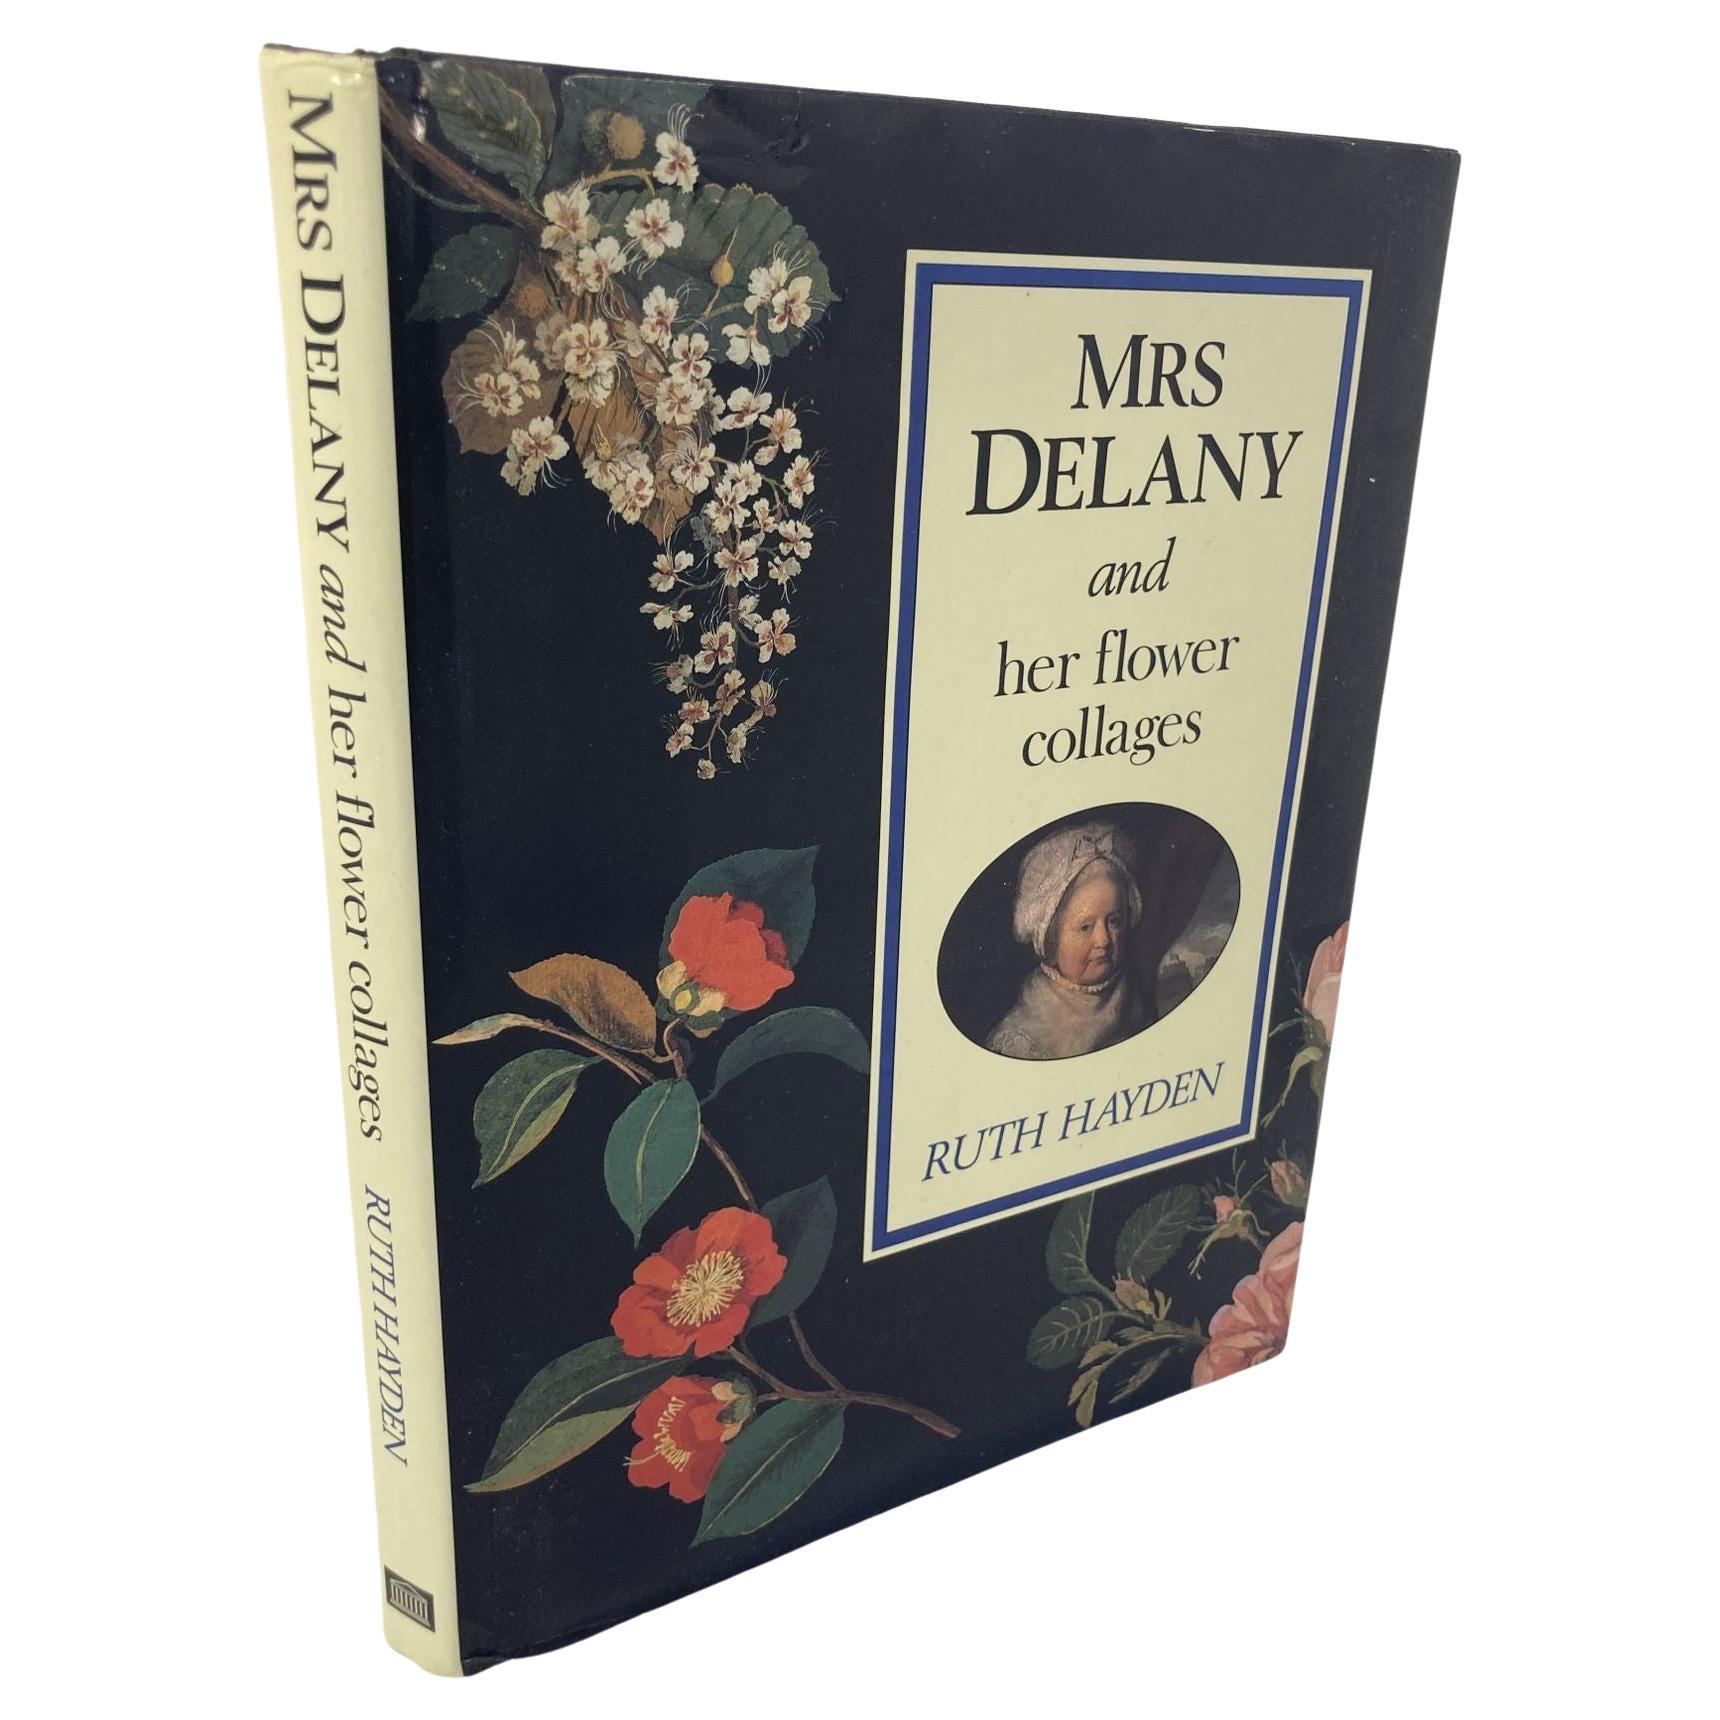 Mrs. Delany and Her Flower Collages Hardcover Book by Ruth Hayden 1992